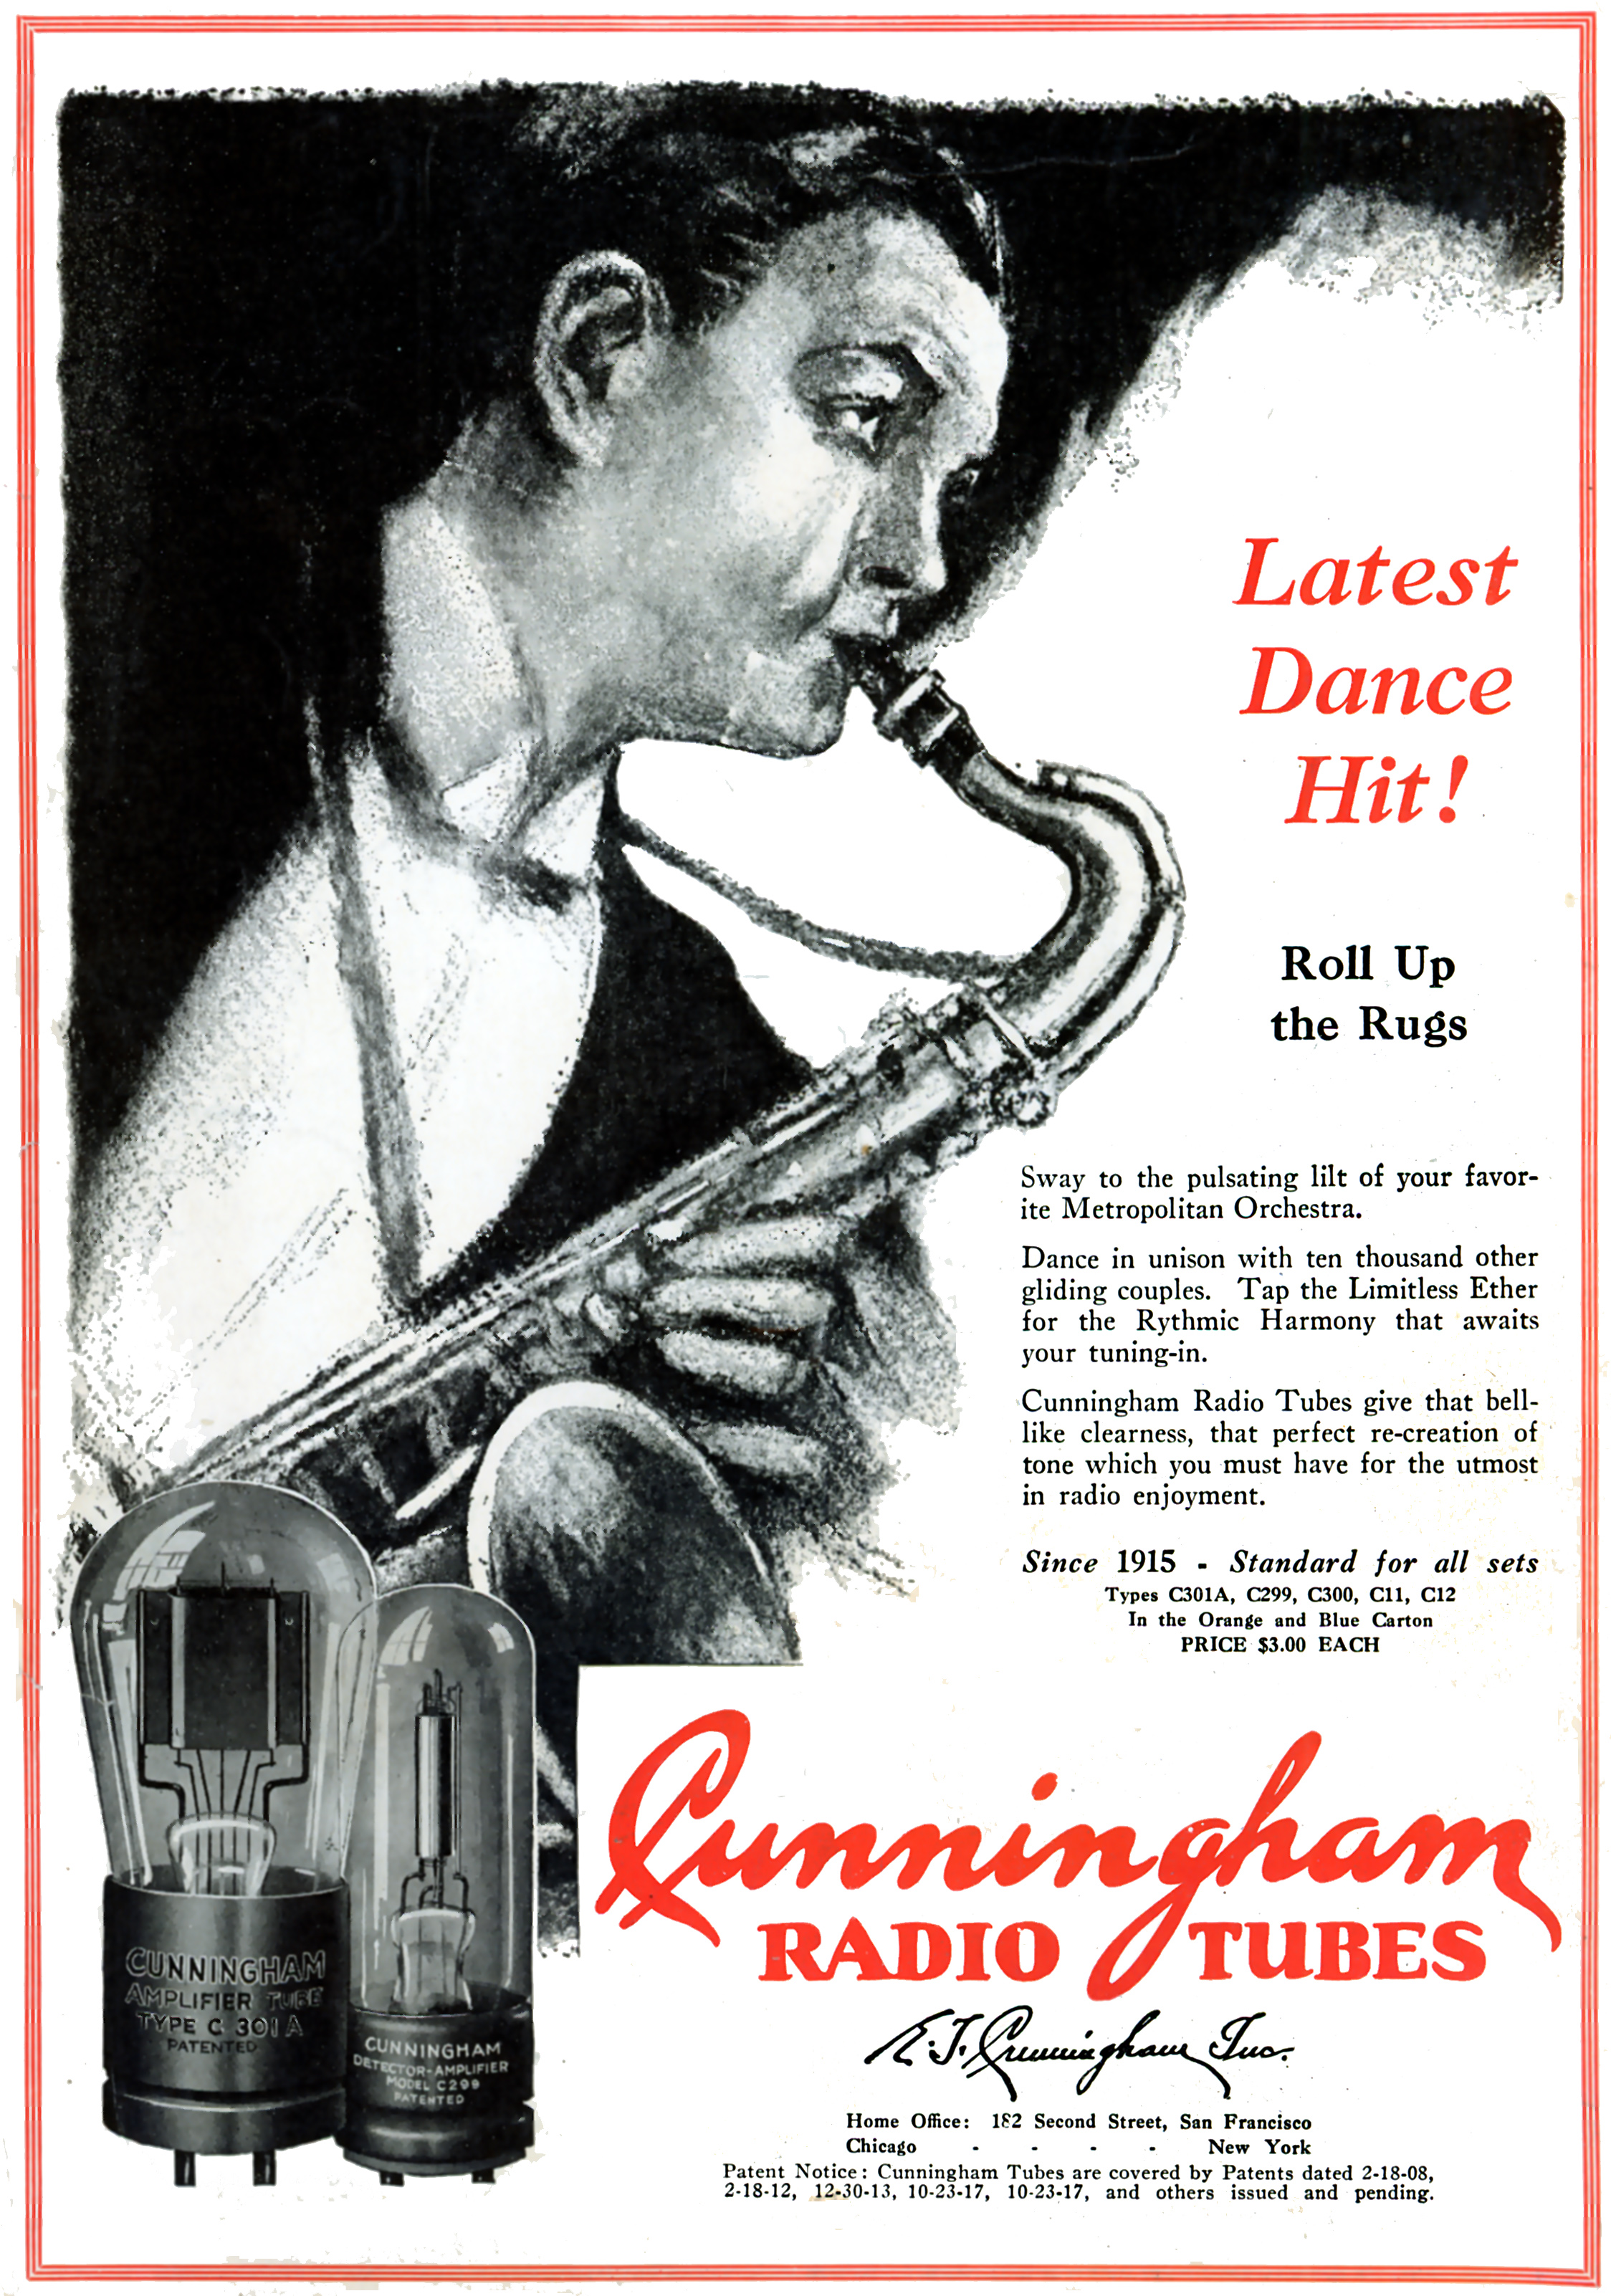 Ad for Cunningham Radio Tubes advertisement with an illustration of a man playing saxophone.